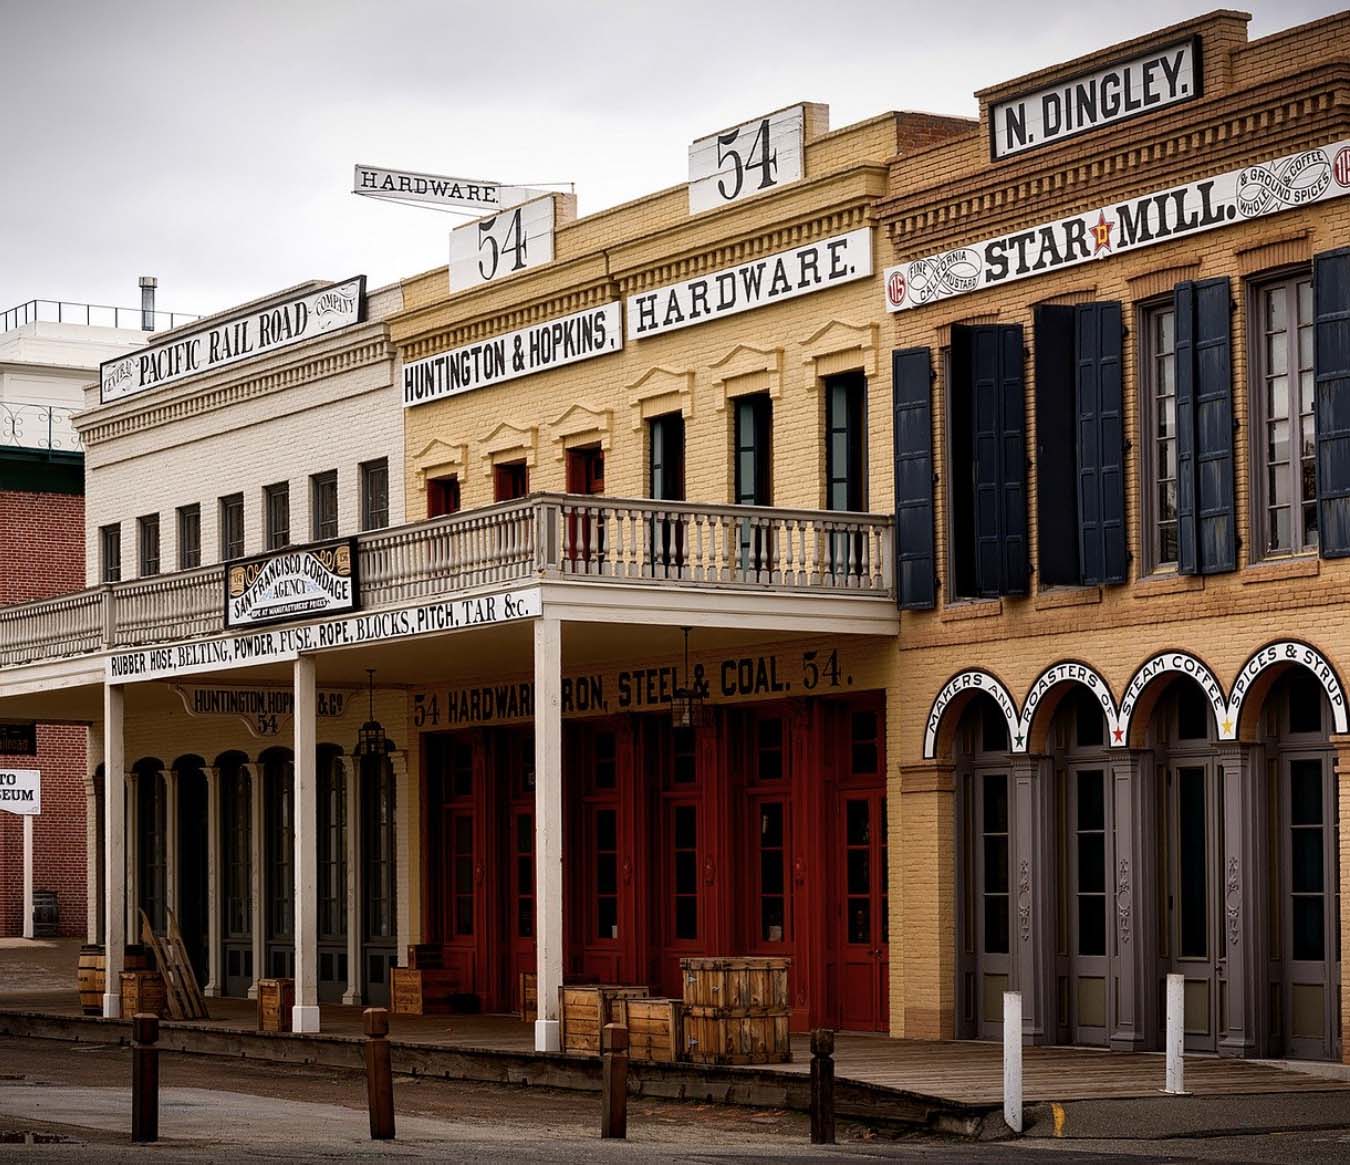 Things to Do in Sacramento - Old Sacramento State Historic Park 